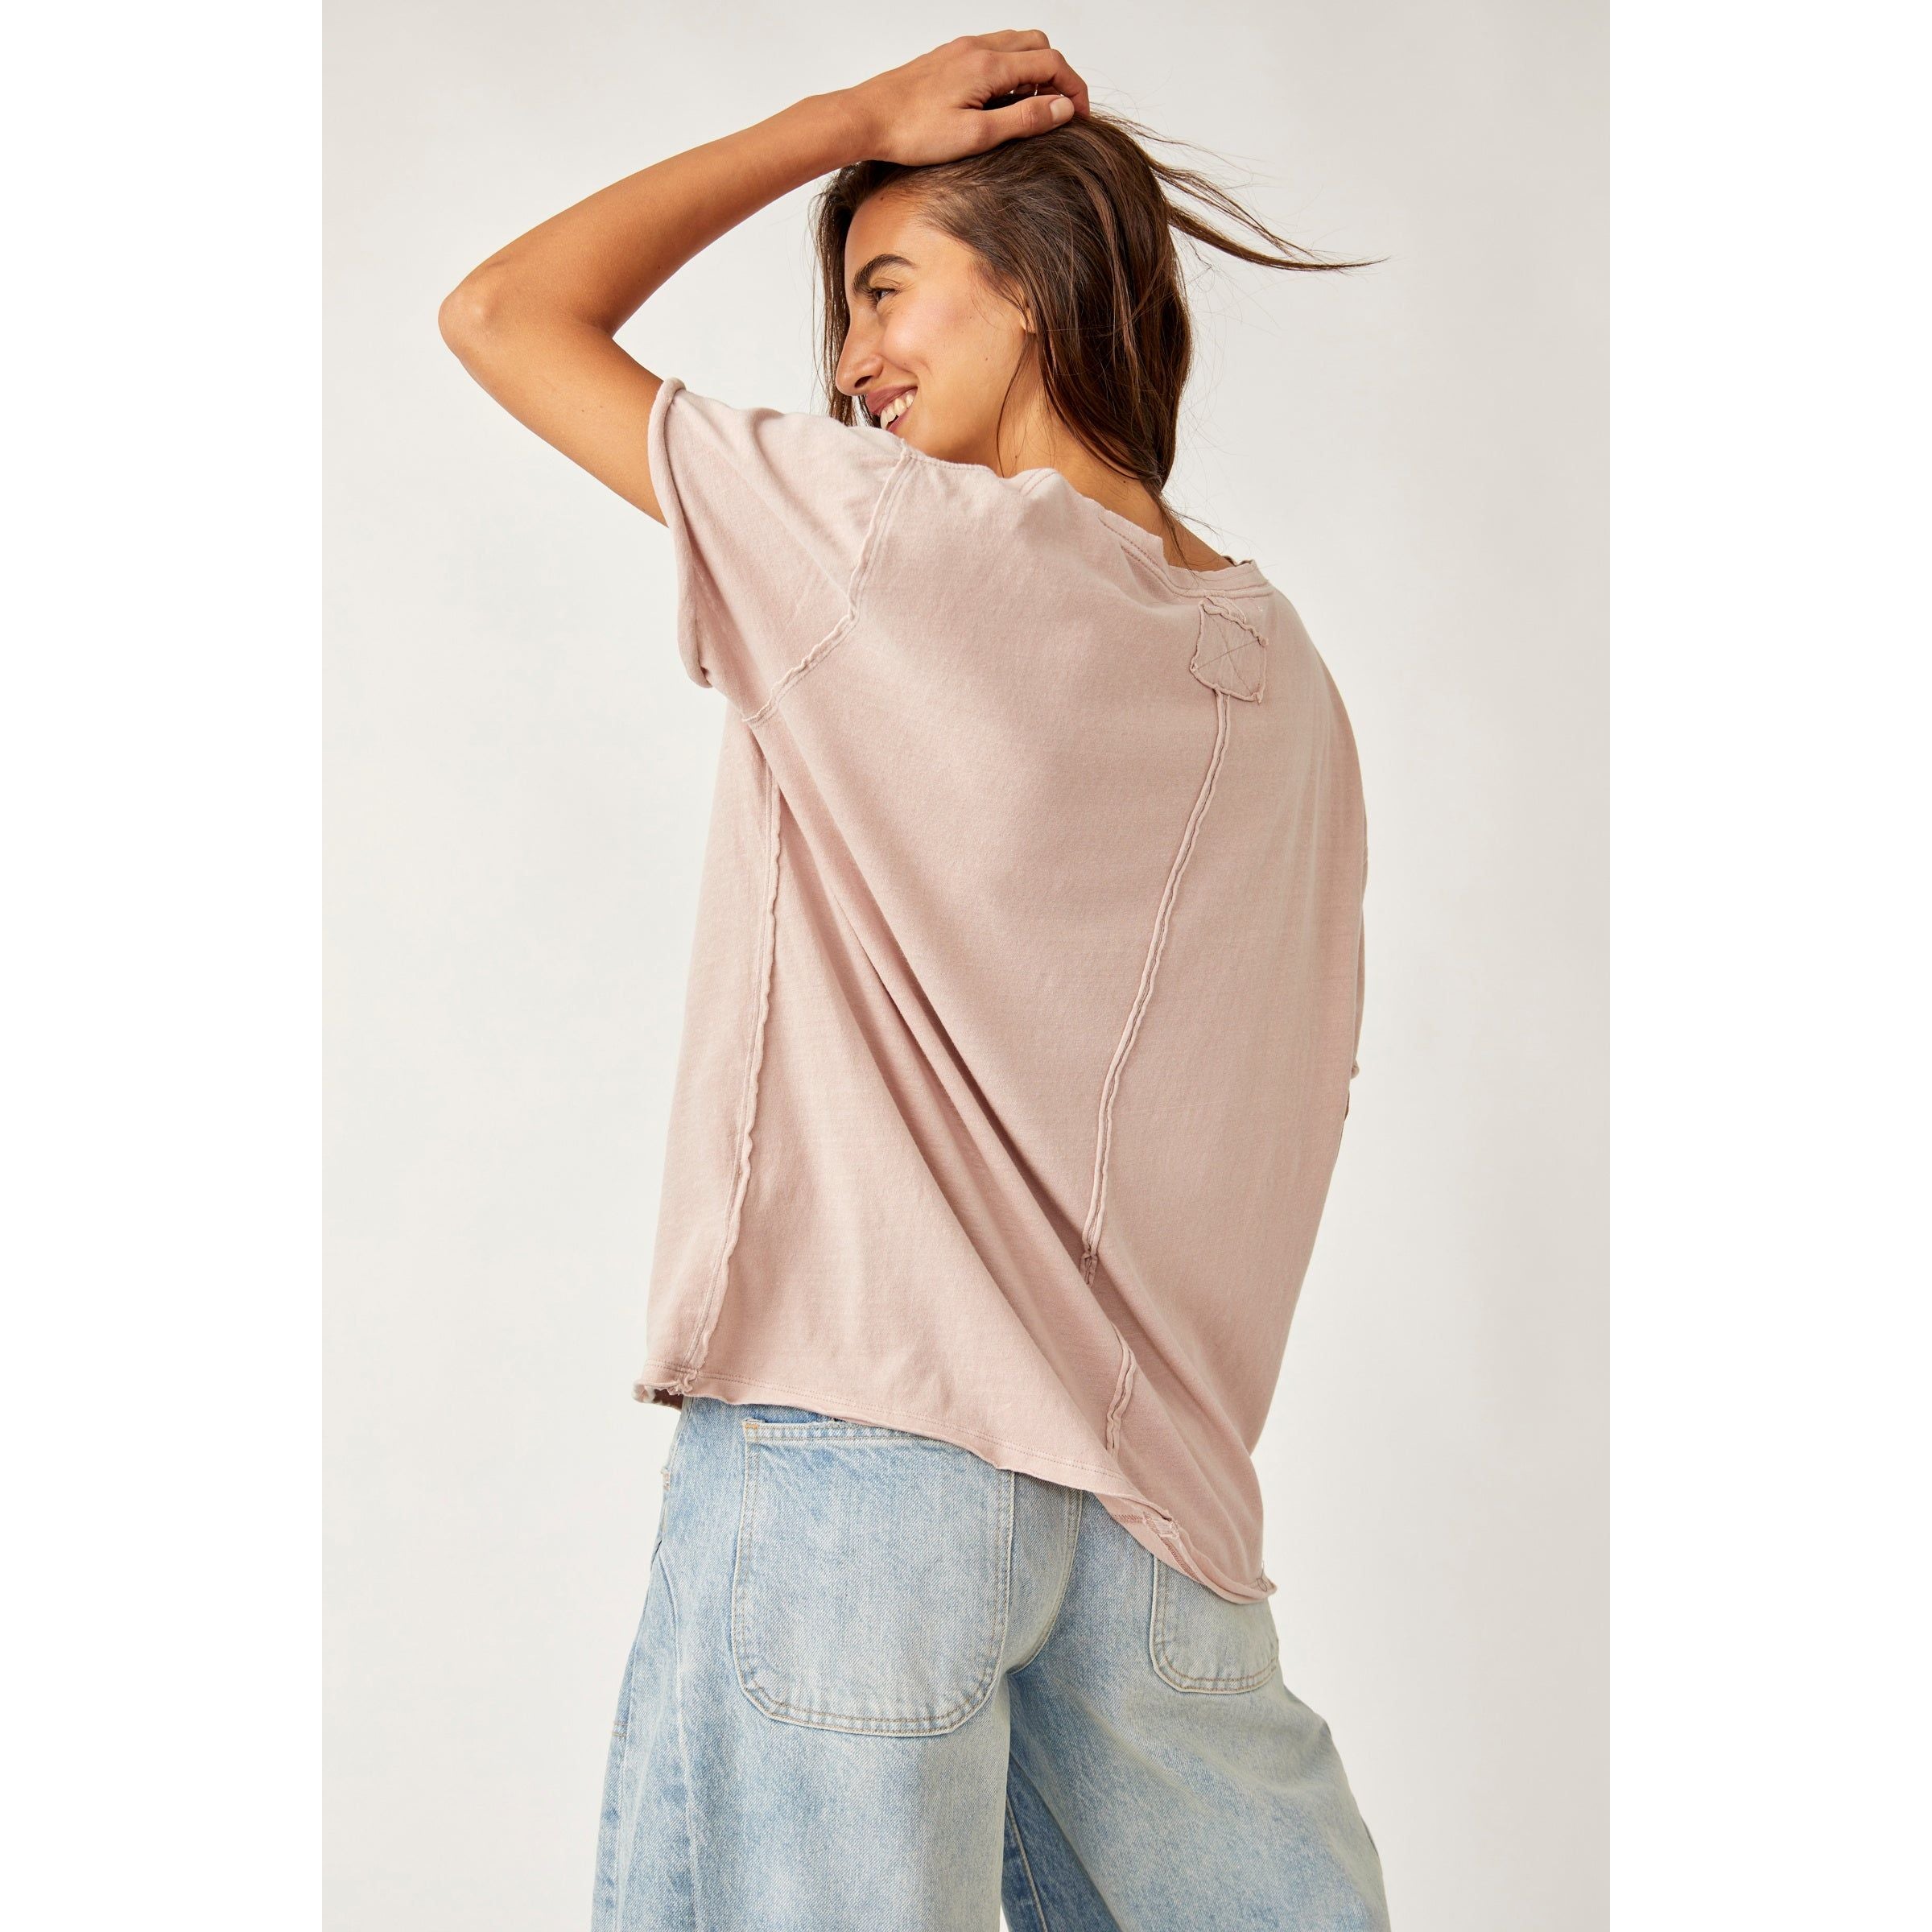 Free People - We The Free Nina Tee in Cashmere